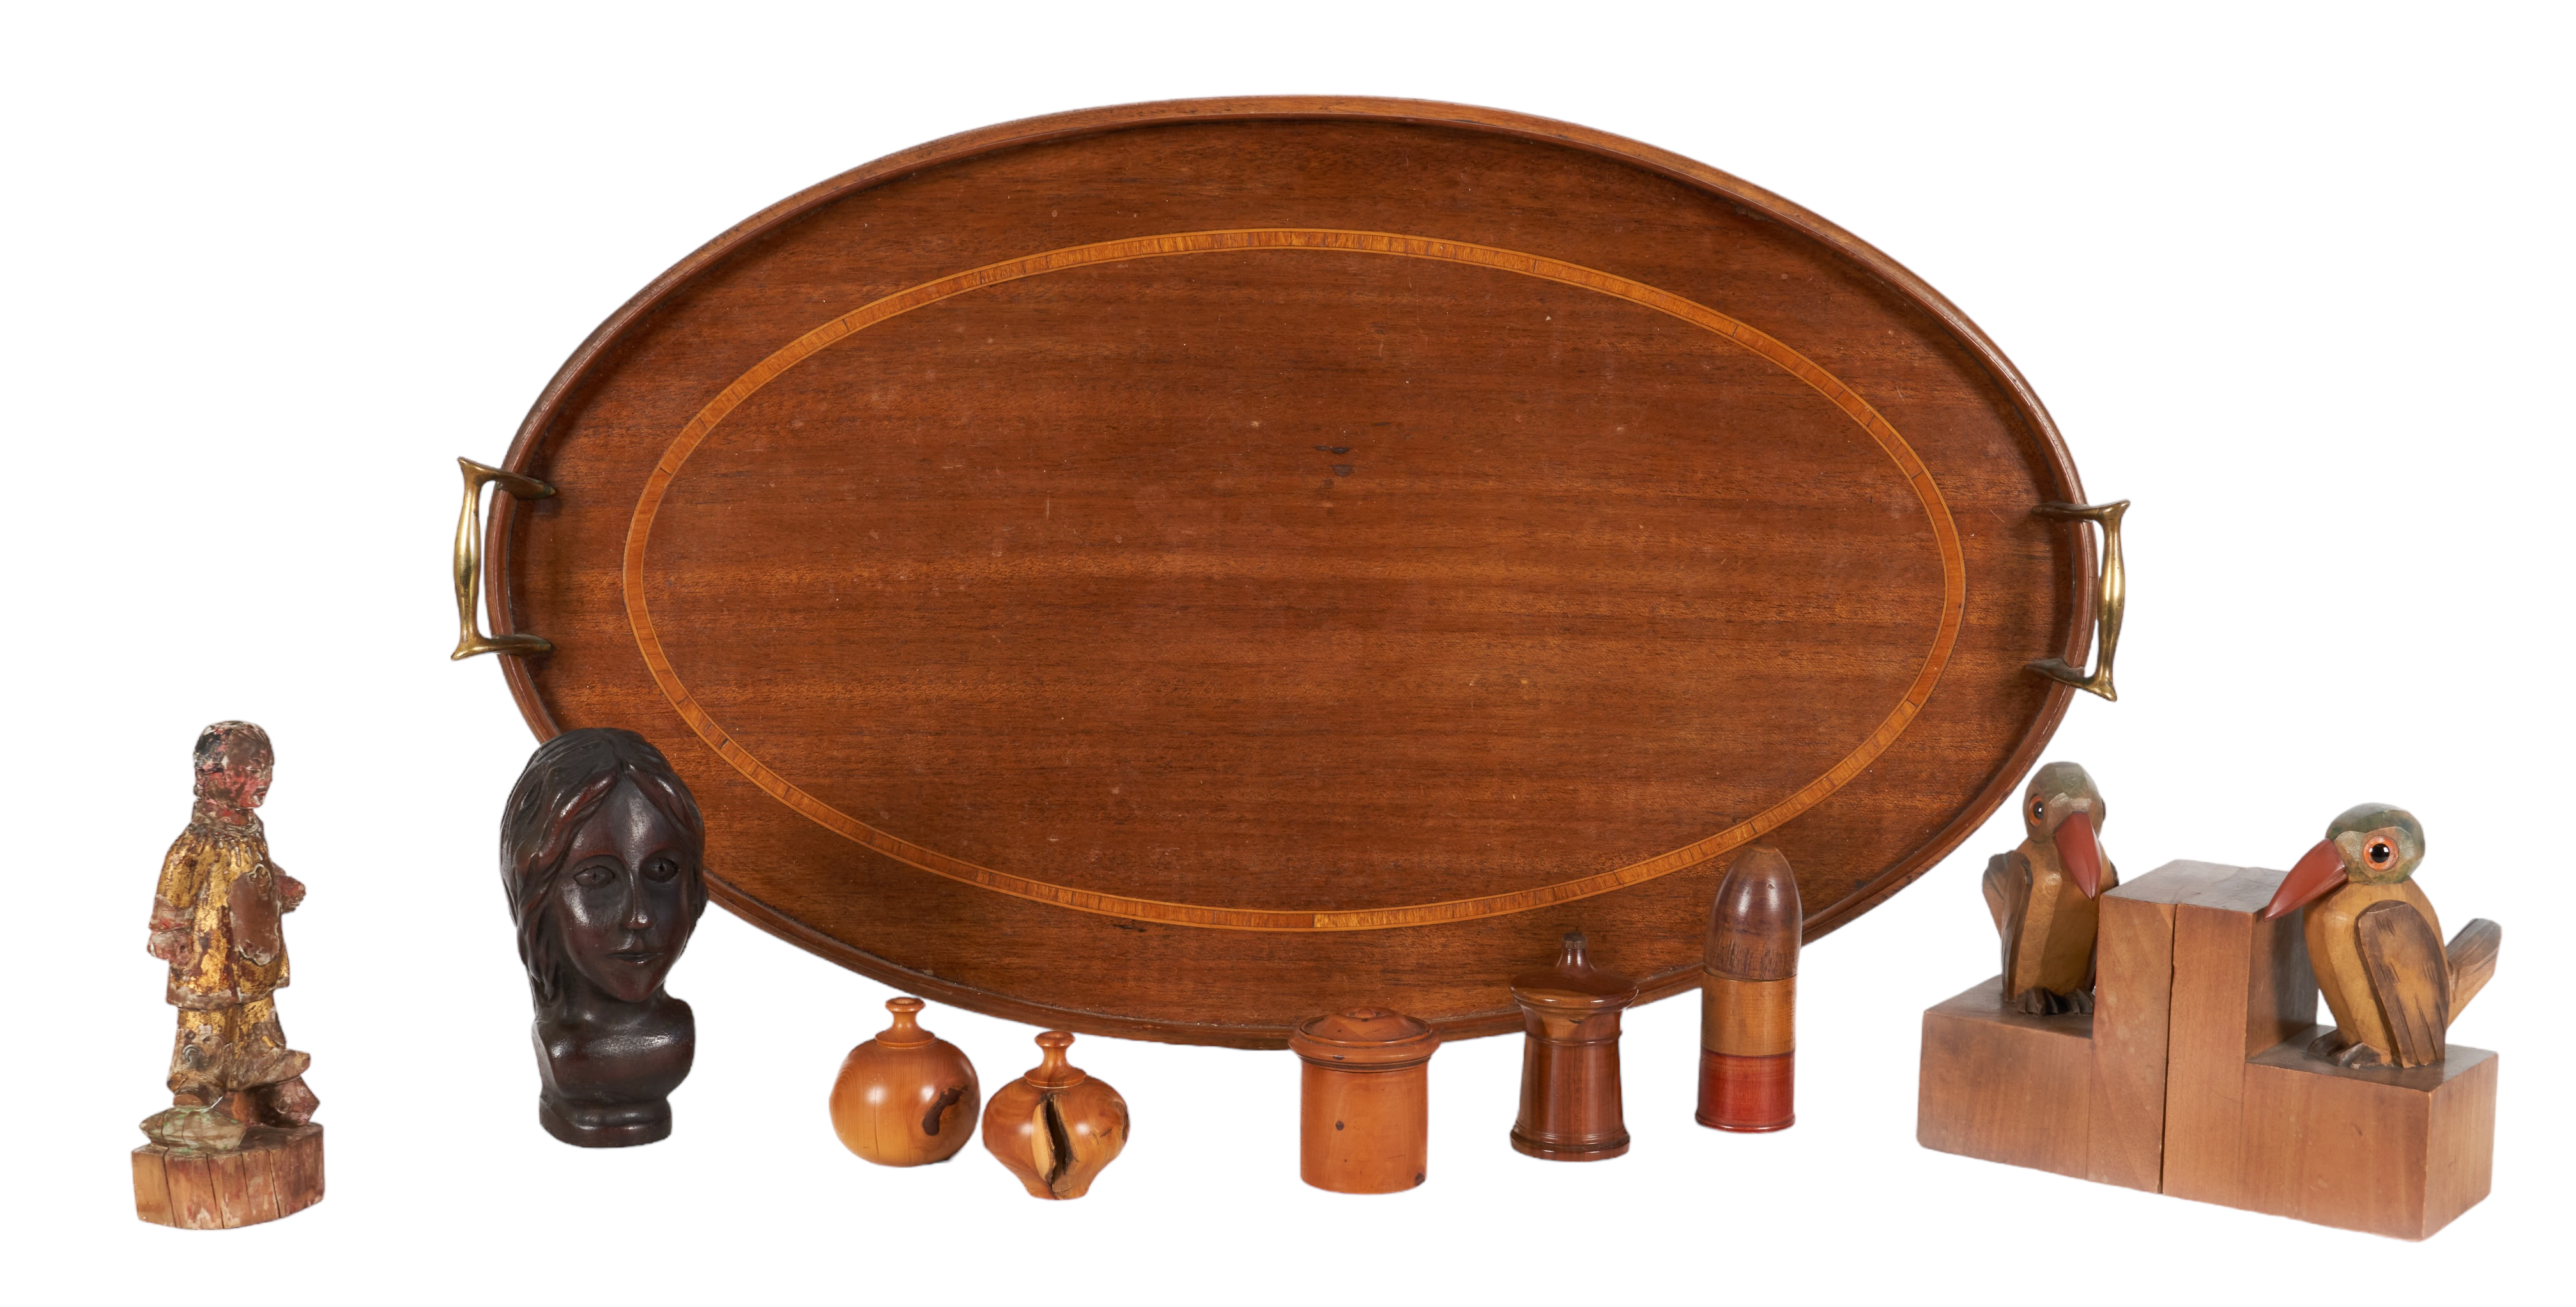 Carved wood articles and tray to 2e248c